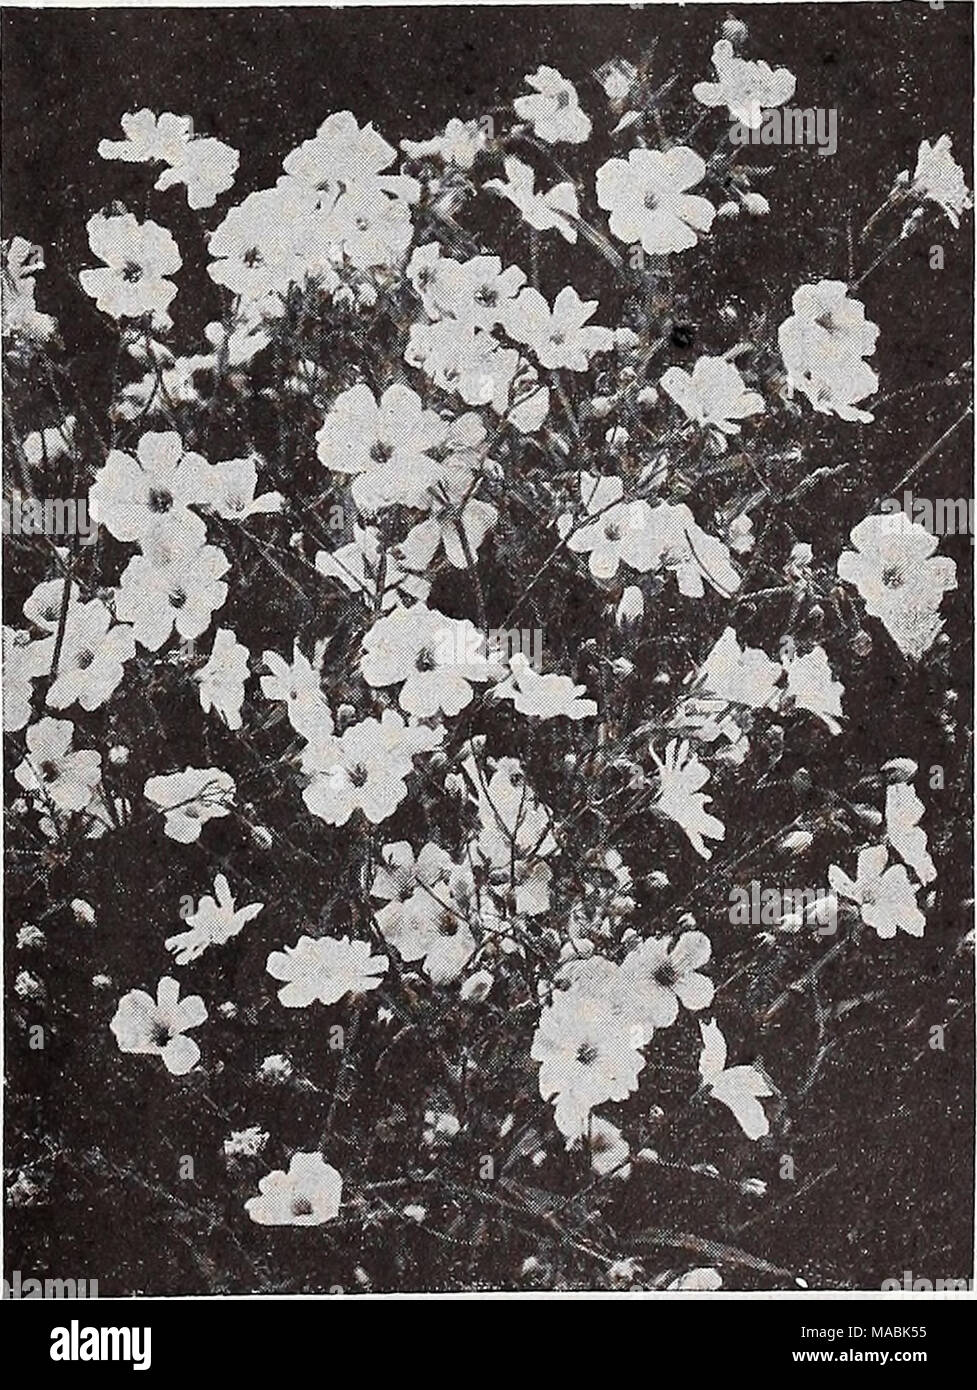 . Dreer's wholesale price list for florists : bulbs flower seeds lawn grass seeds plants sundries . Gypsophila Elegans Alba Grandiflora (Paris Market Strain) Hortus (New). A Concise Dictionary of Gardening. By L. H. Bailey, $10.00 per copy, postpaid. Stock Photo